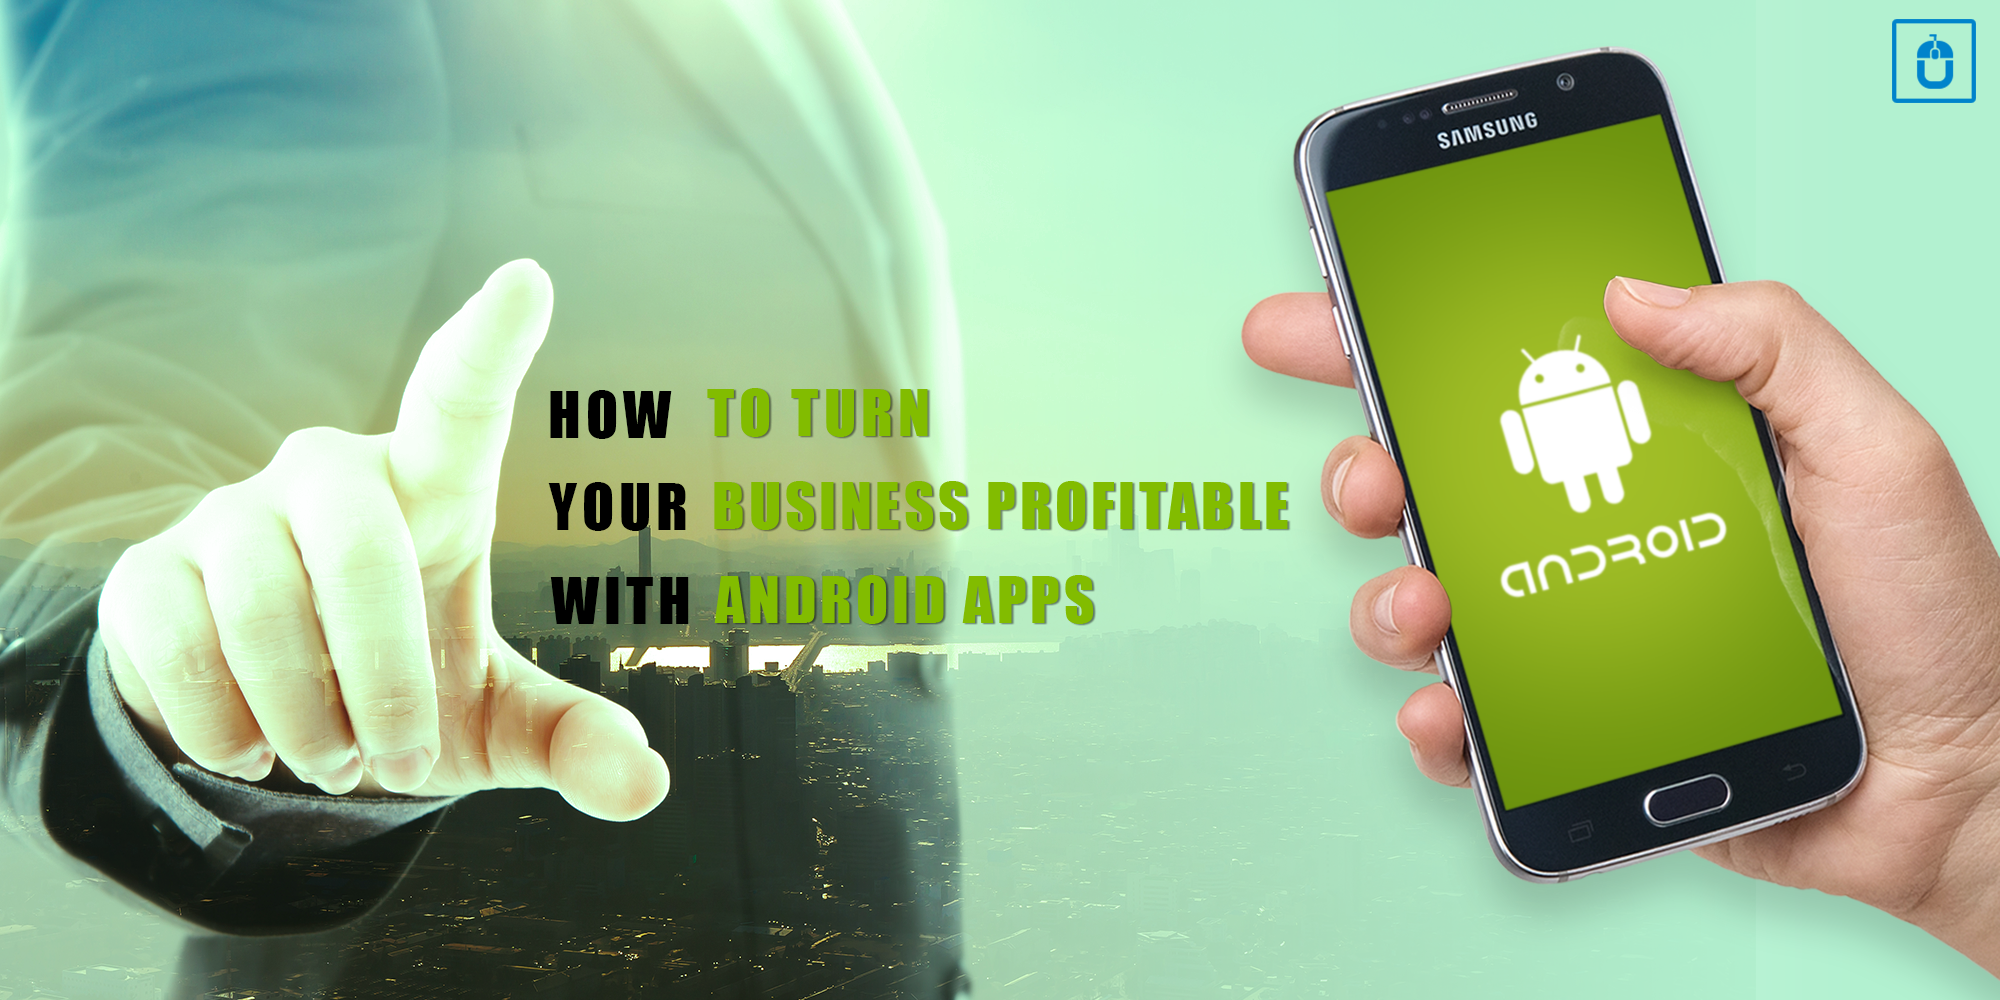 How To Turn Your Business Profitable With Android Apps